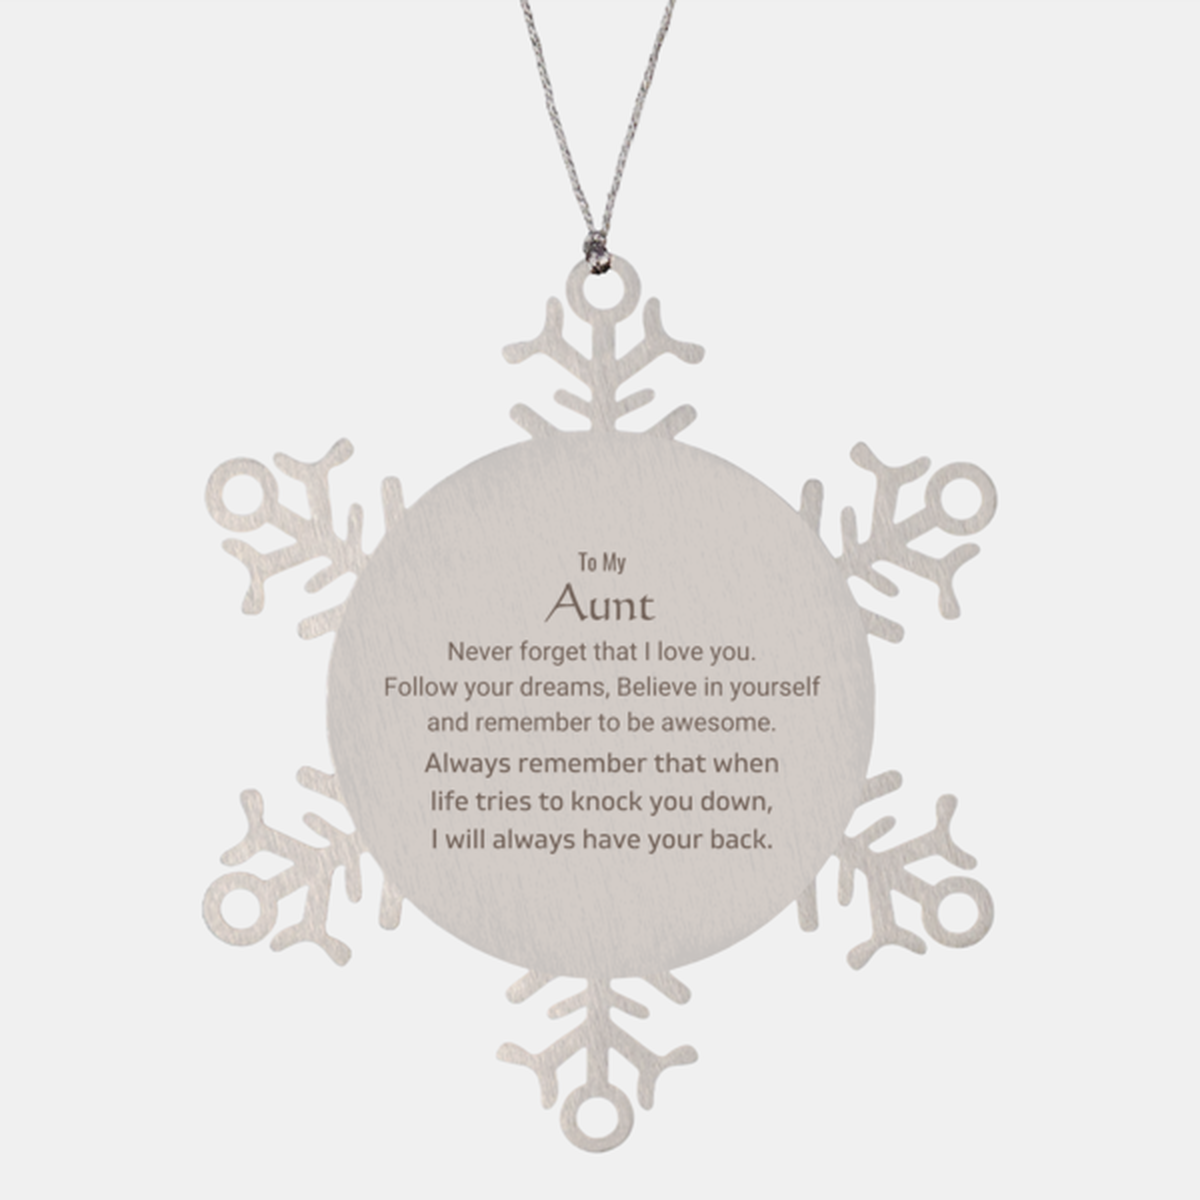 Inspirational Gifts for Aunt, Follow your dreams, Believe in yourself, Aunt Snowflake Ornament, Birthday Christmas Unique Gifts For Aunt